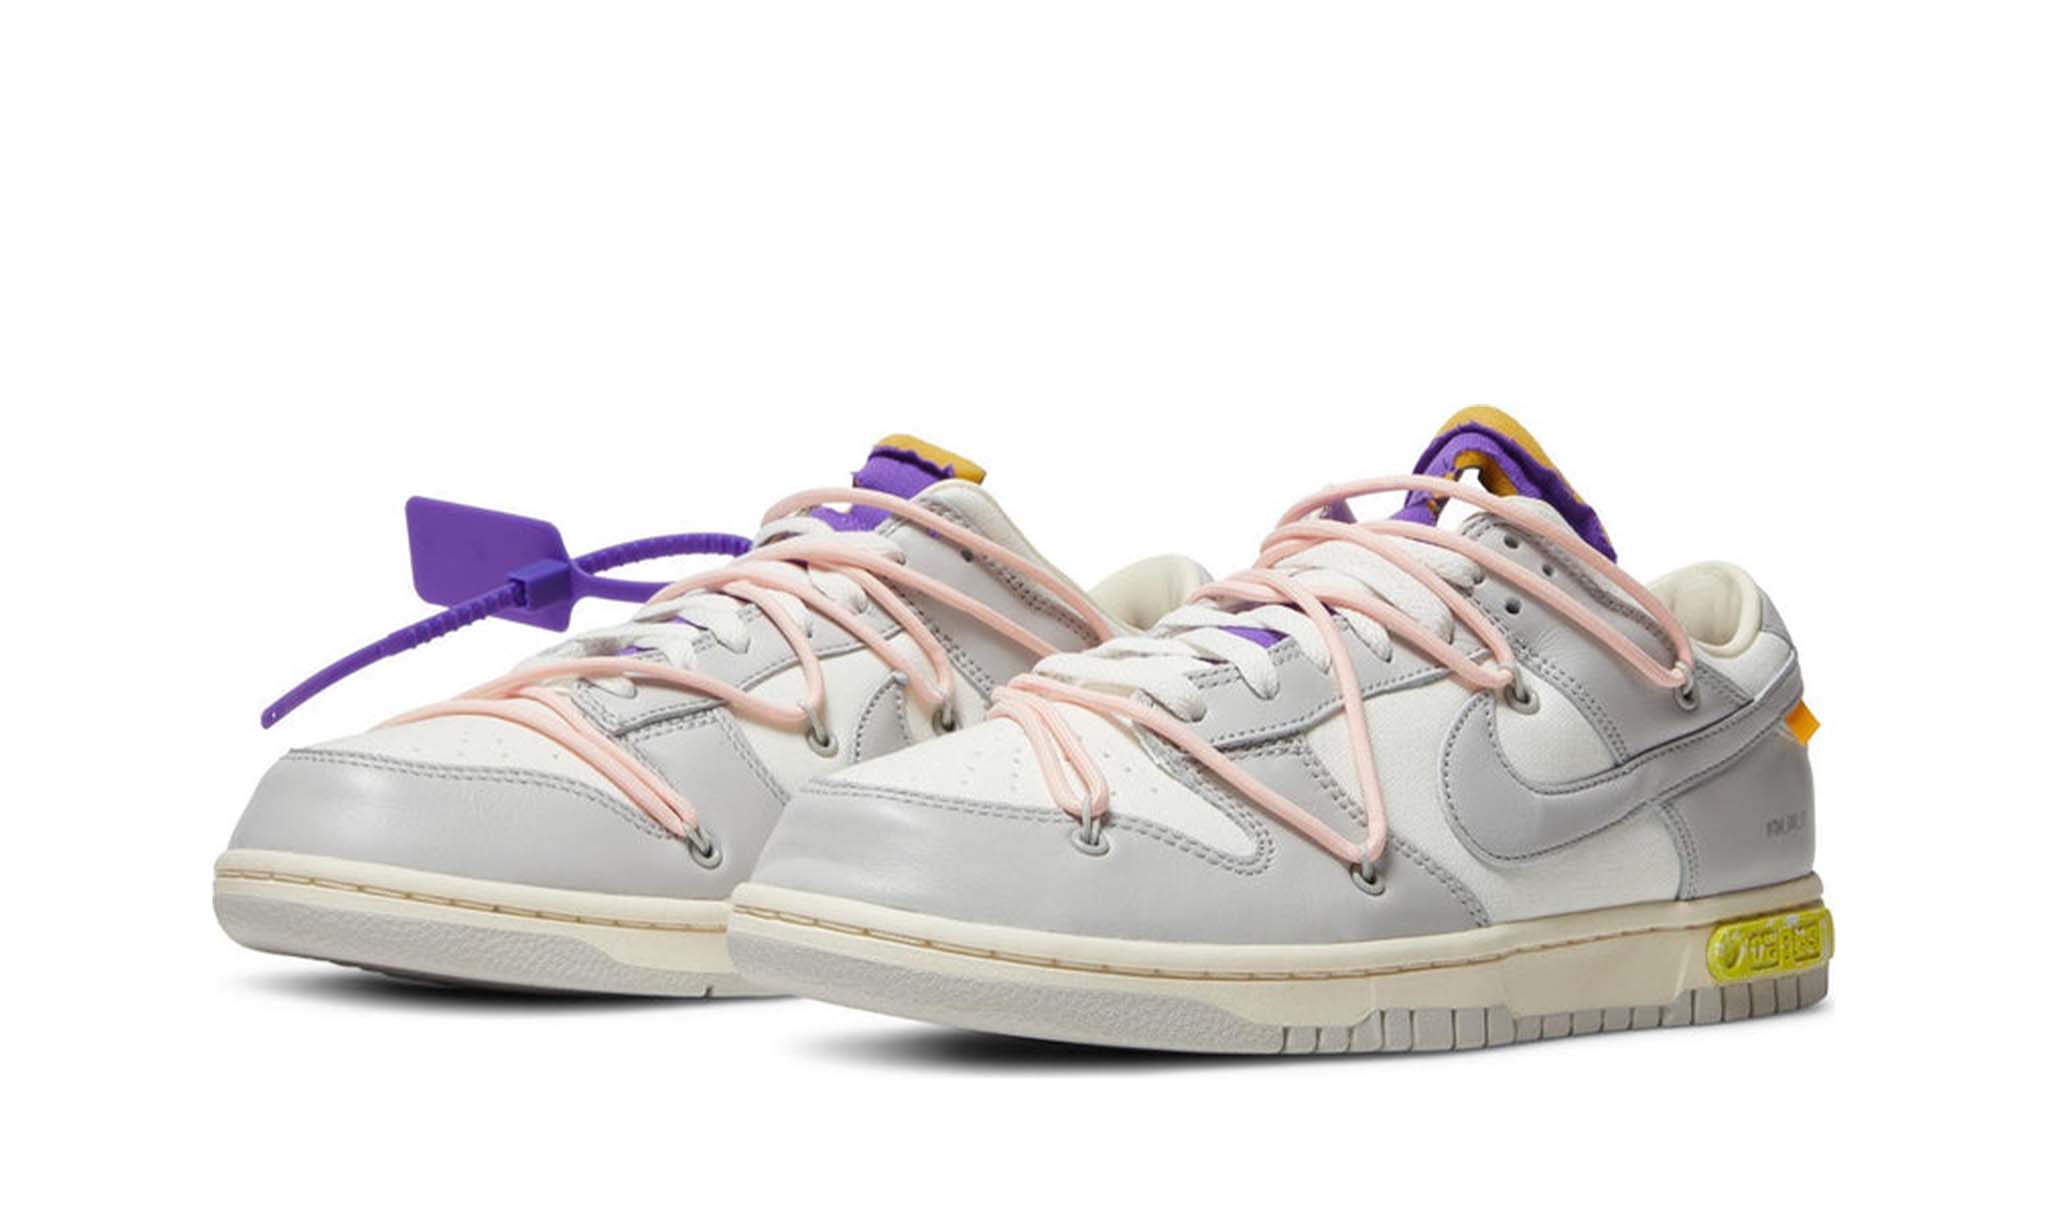 Off White x Nike Dunk Low lot 24/50